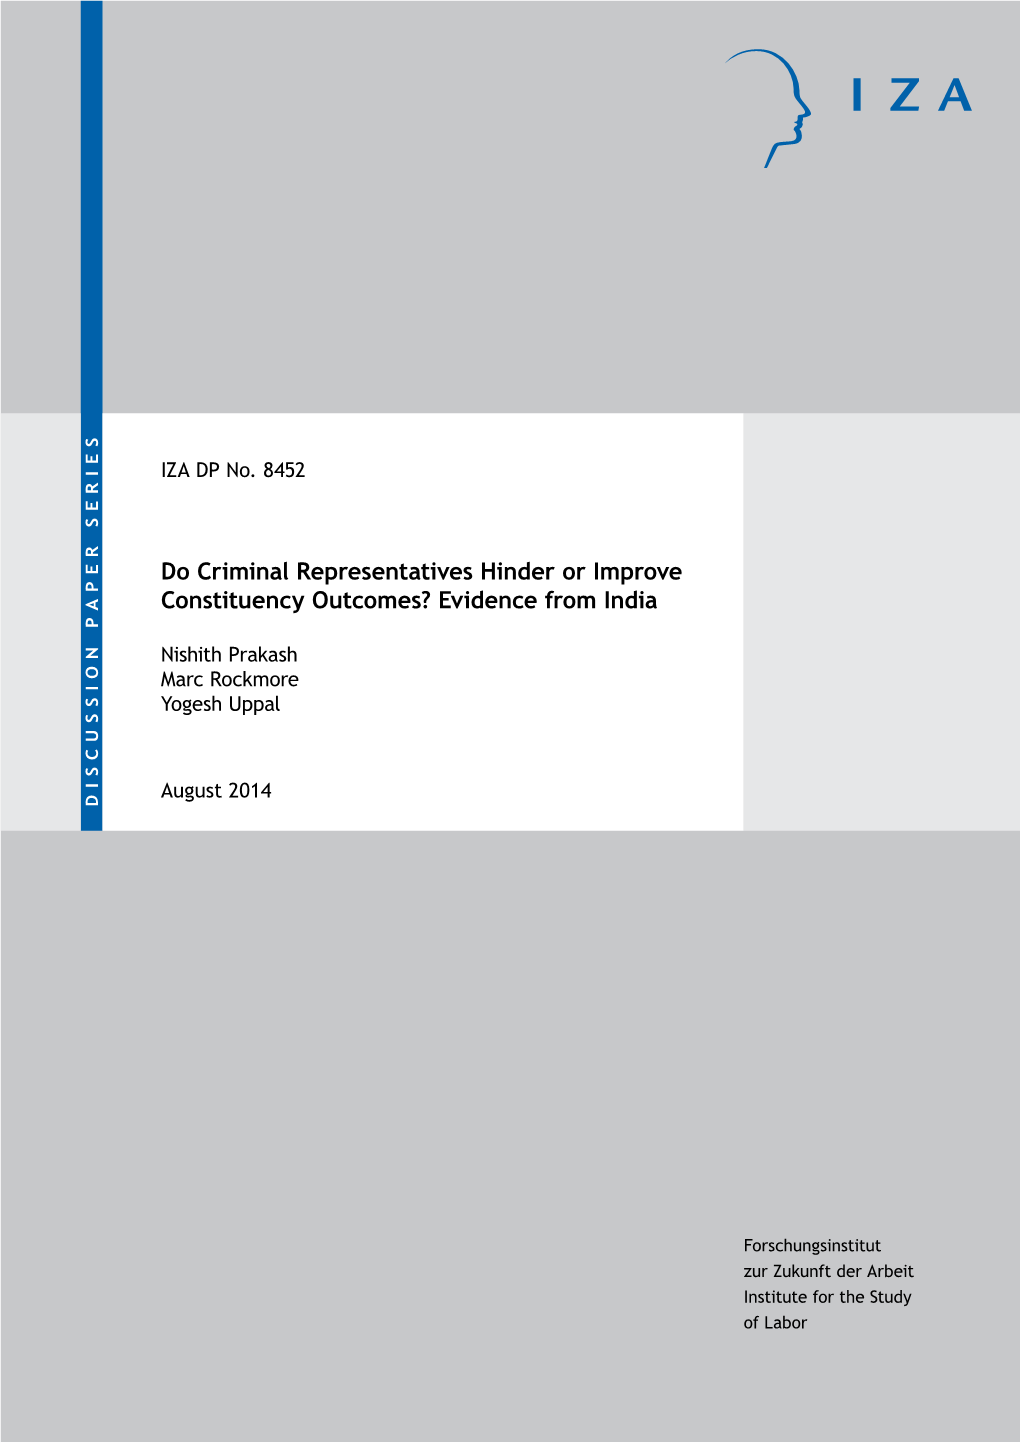 Do Criminal Representatives Hinder Or Improve Constituency Outcomes? Evidence from India